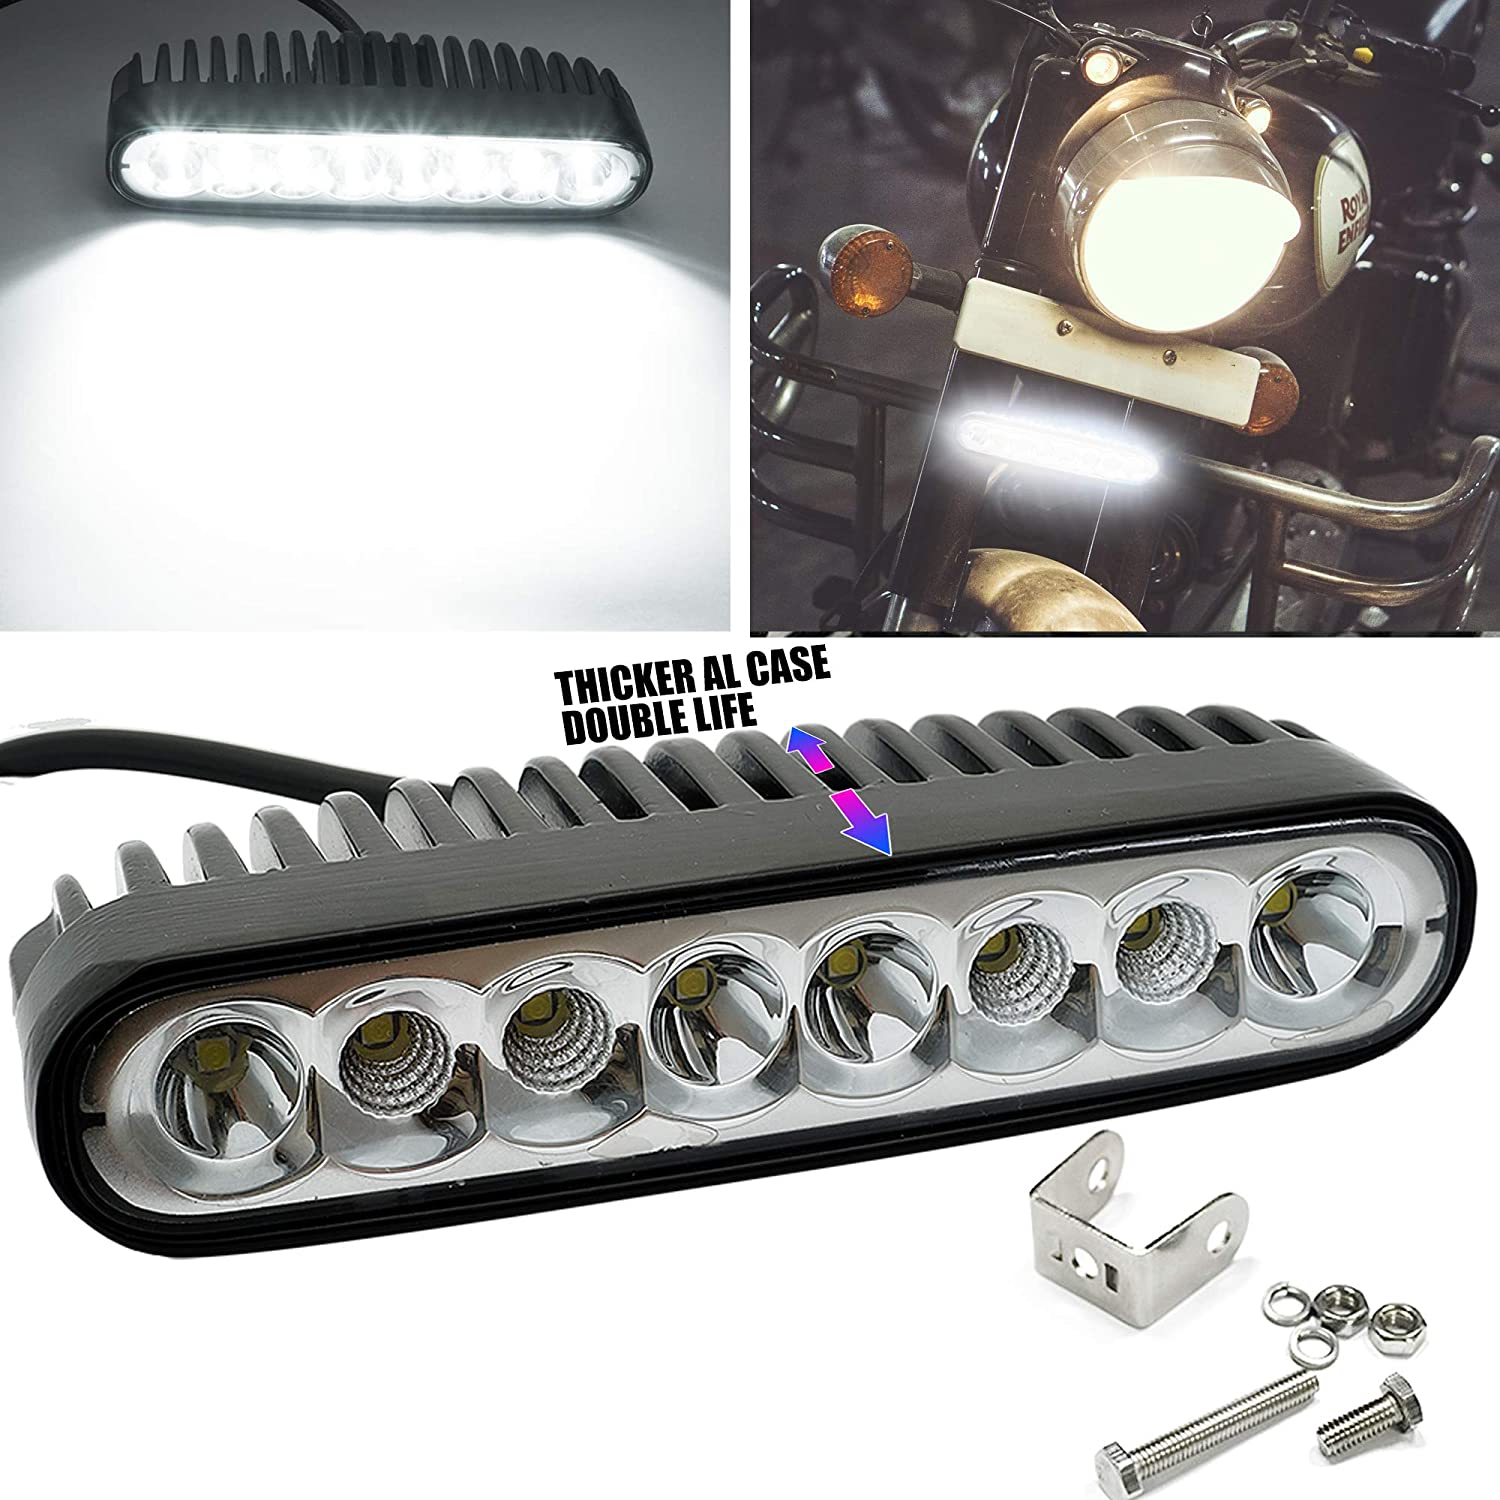 4inch LED Work Light 4x4 Off Road Pods LED Light Bar 6 Modes Fog Driving  For Motorcycle Truck Jeep Boat Fog Lights Headlight - AliExpress